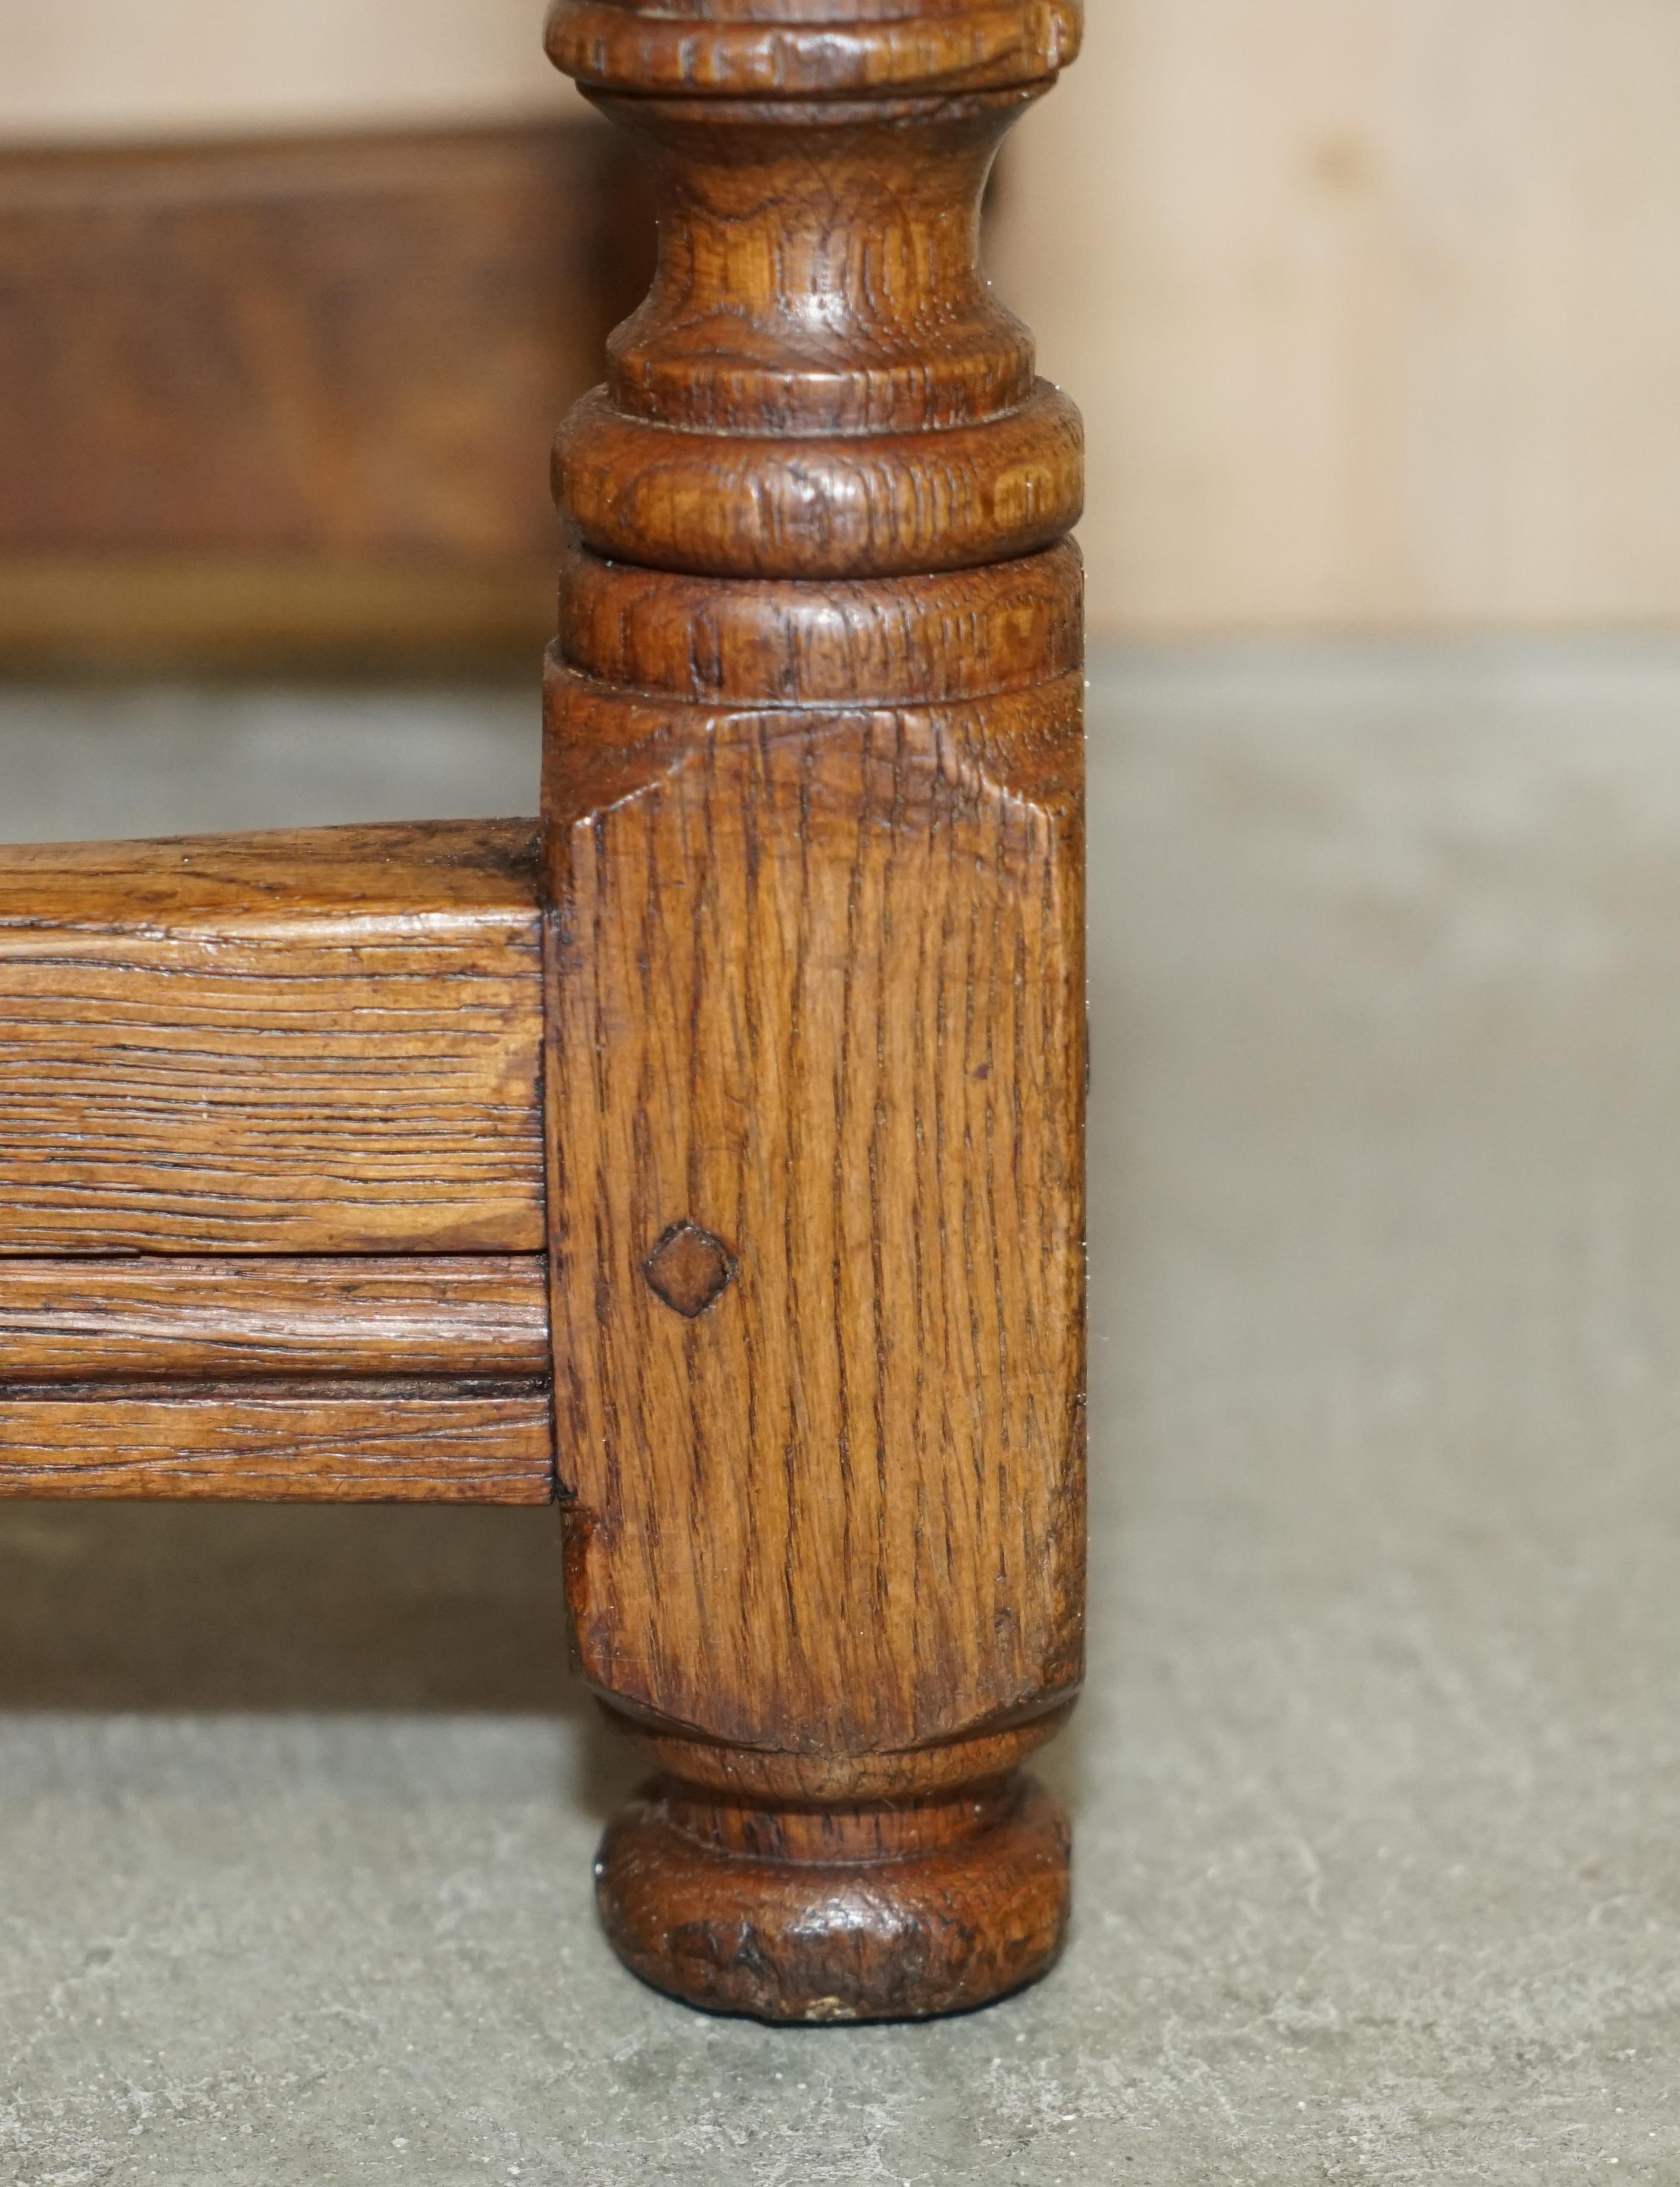 STUNNiNG HEAVILY BURRED OAK ANTIQUE 18TH CENTURY CIRCA 1780 JOINTED STOOL TABLE For Sale 5